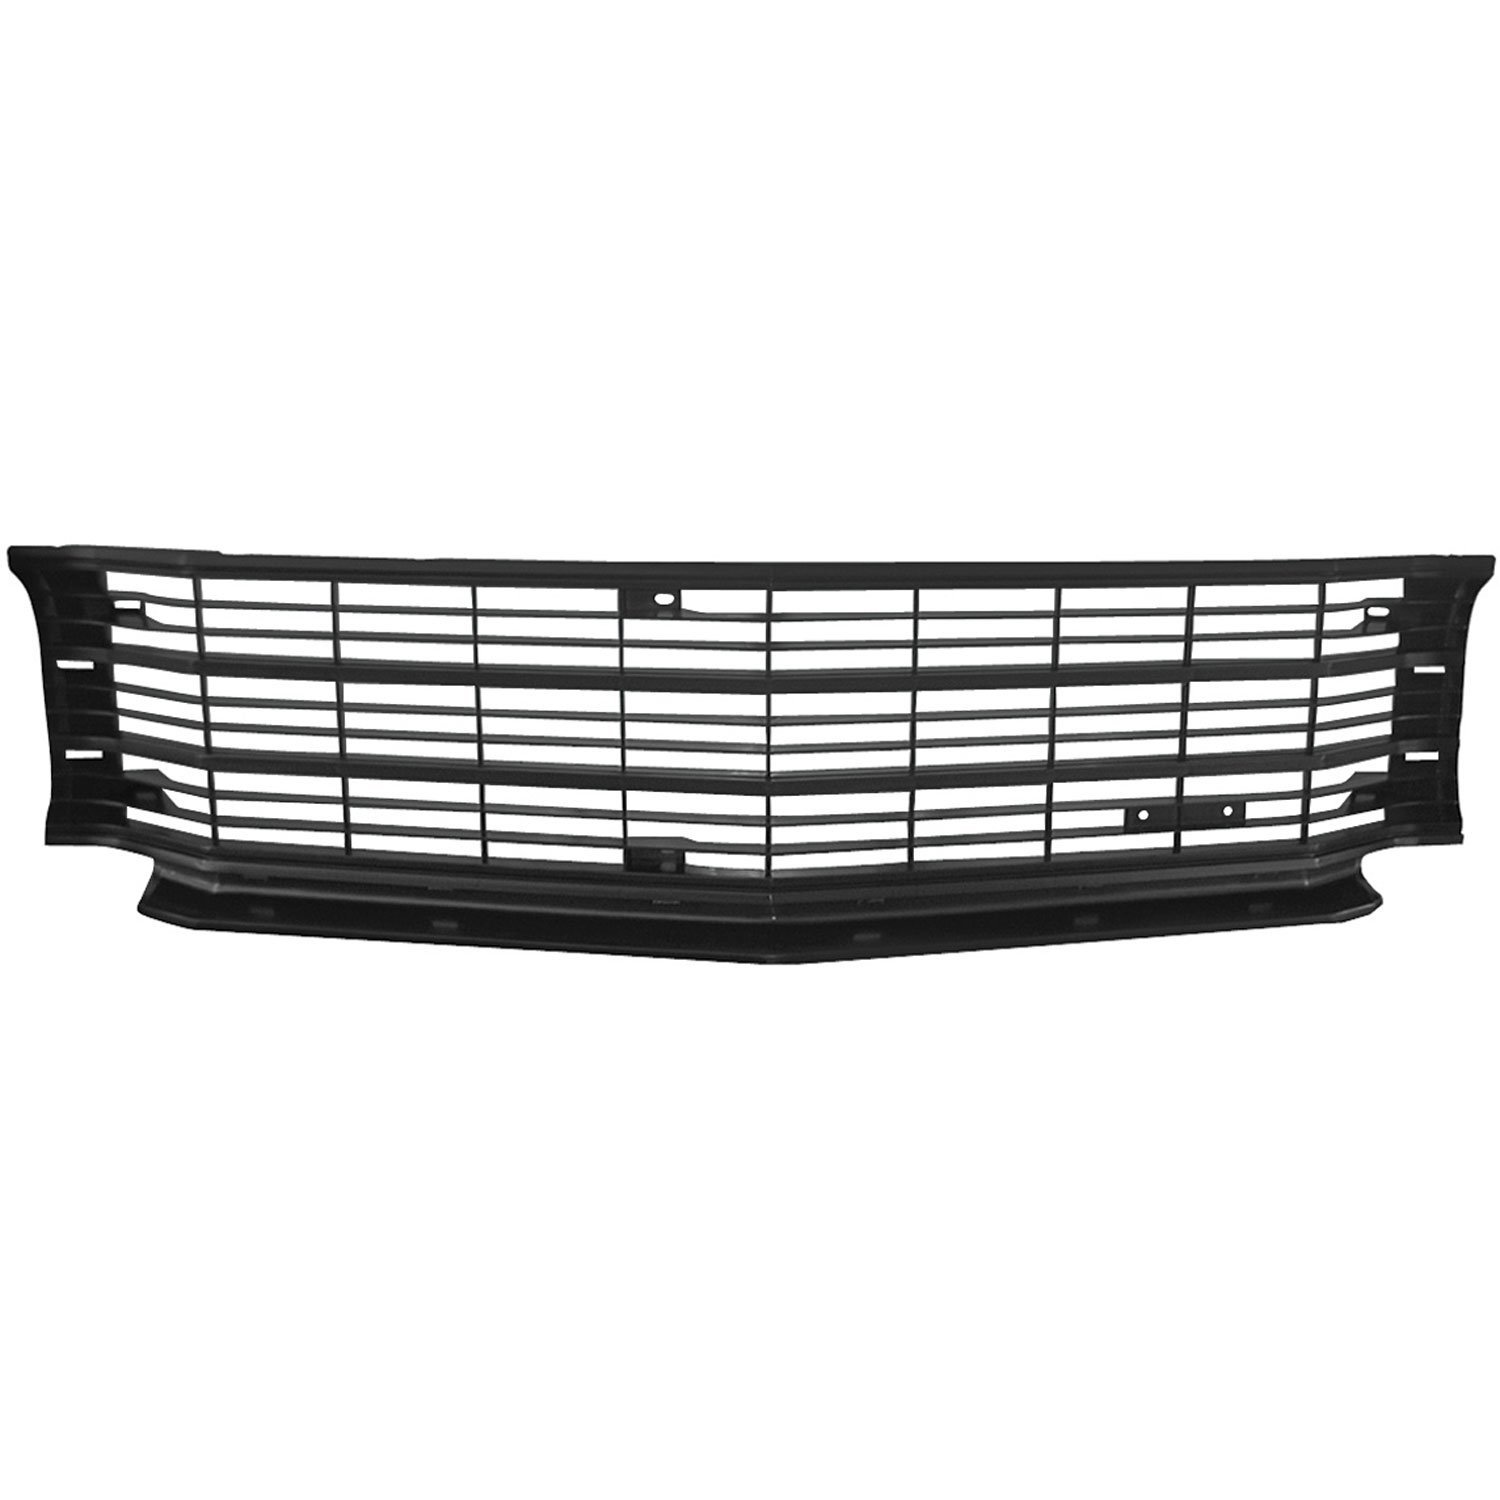 Grille for 1972 Chevrolet Chevelle SS, El Camino SS